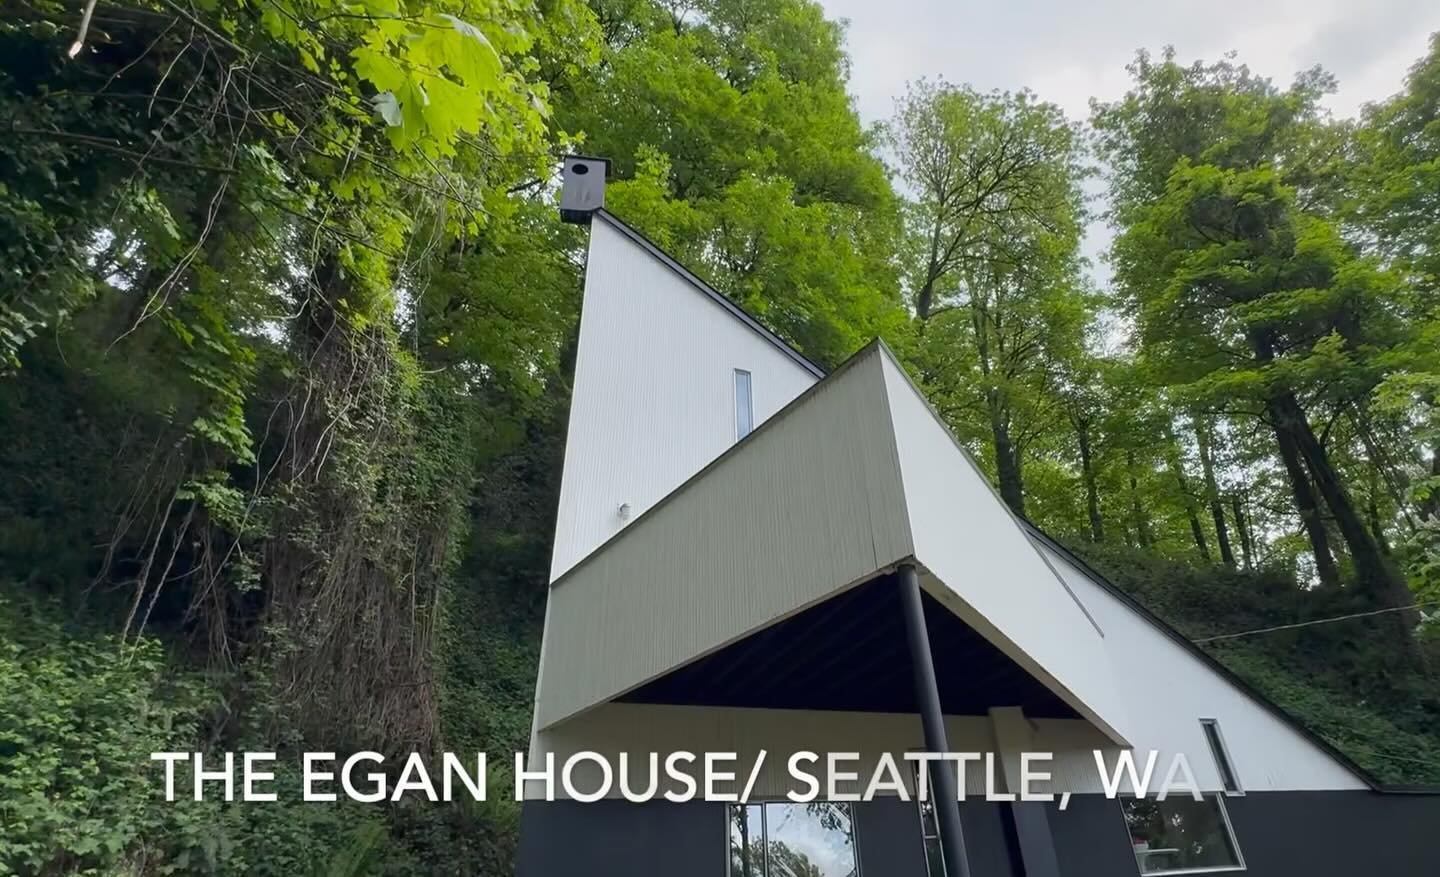 The Egan House. Staged by Spade And Archer. 
https://vimeo.com/944491786